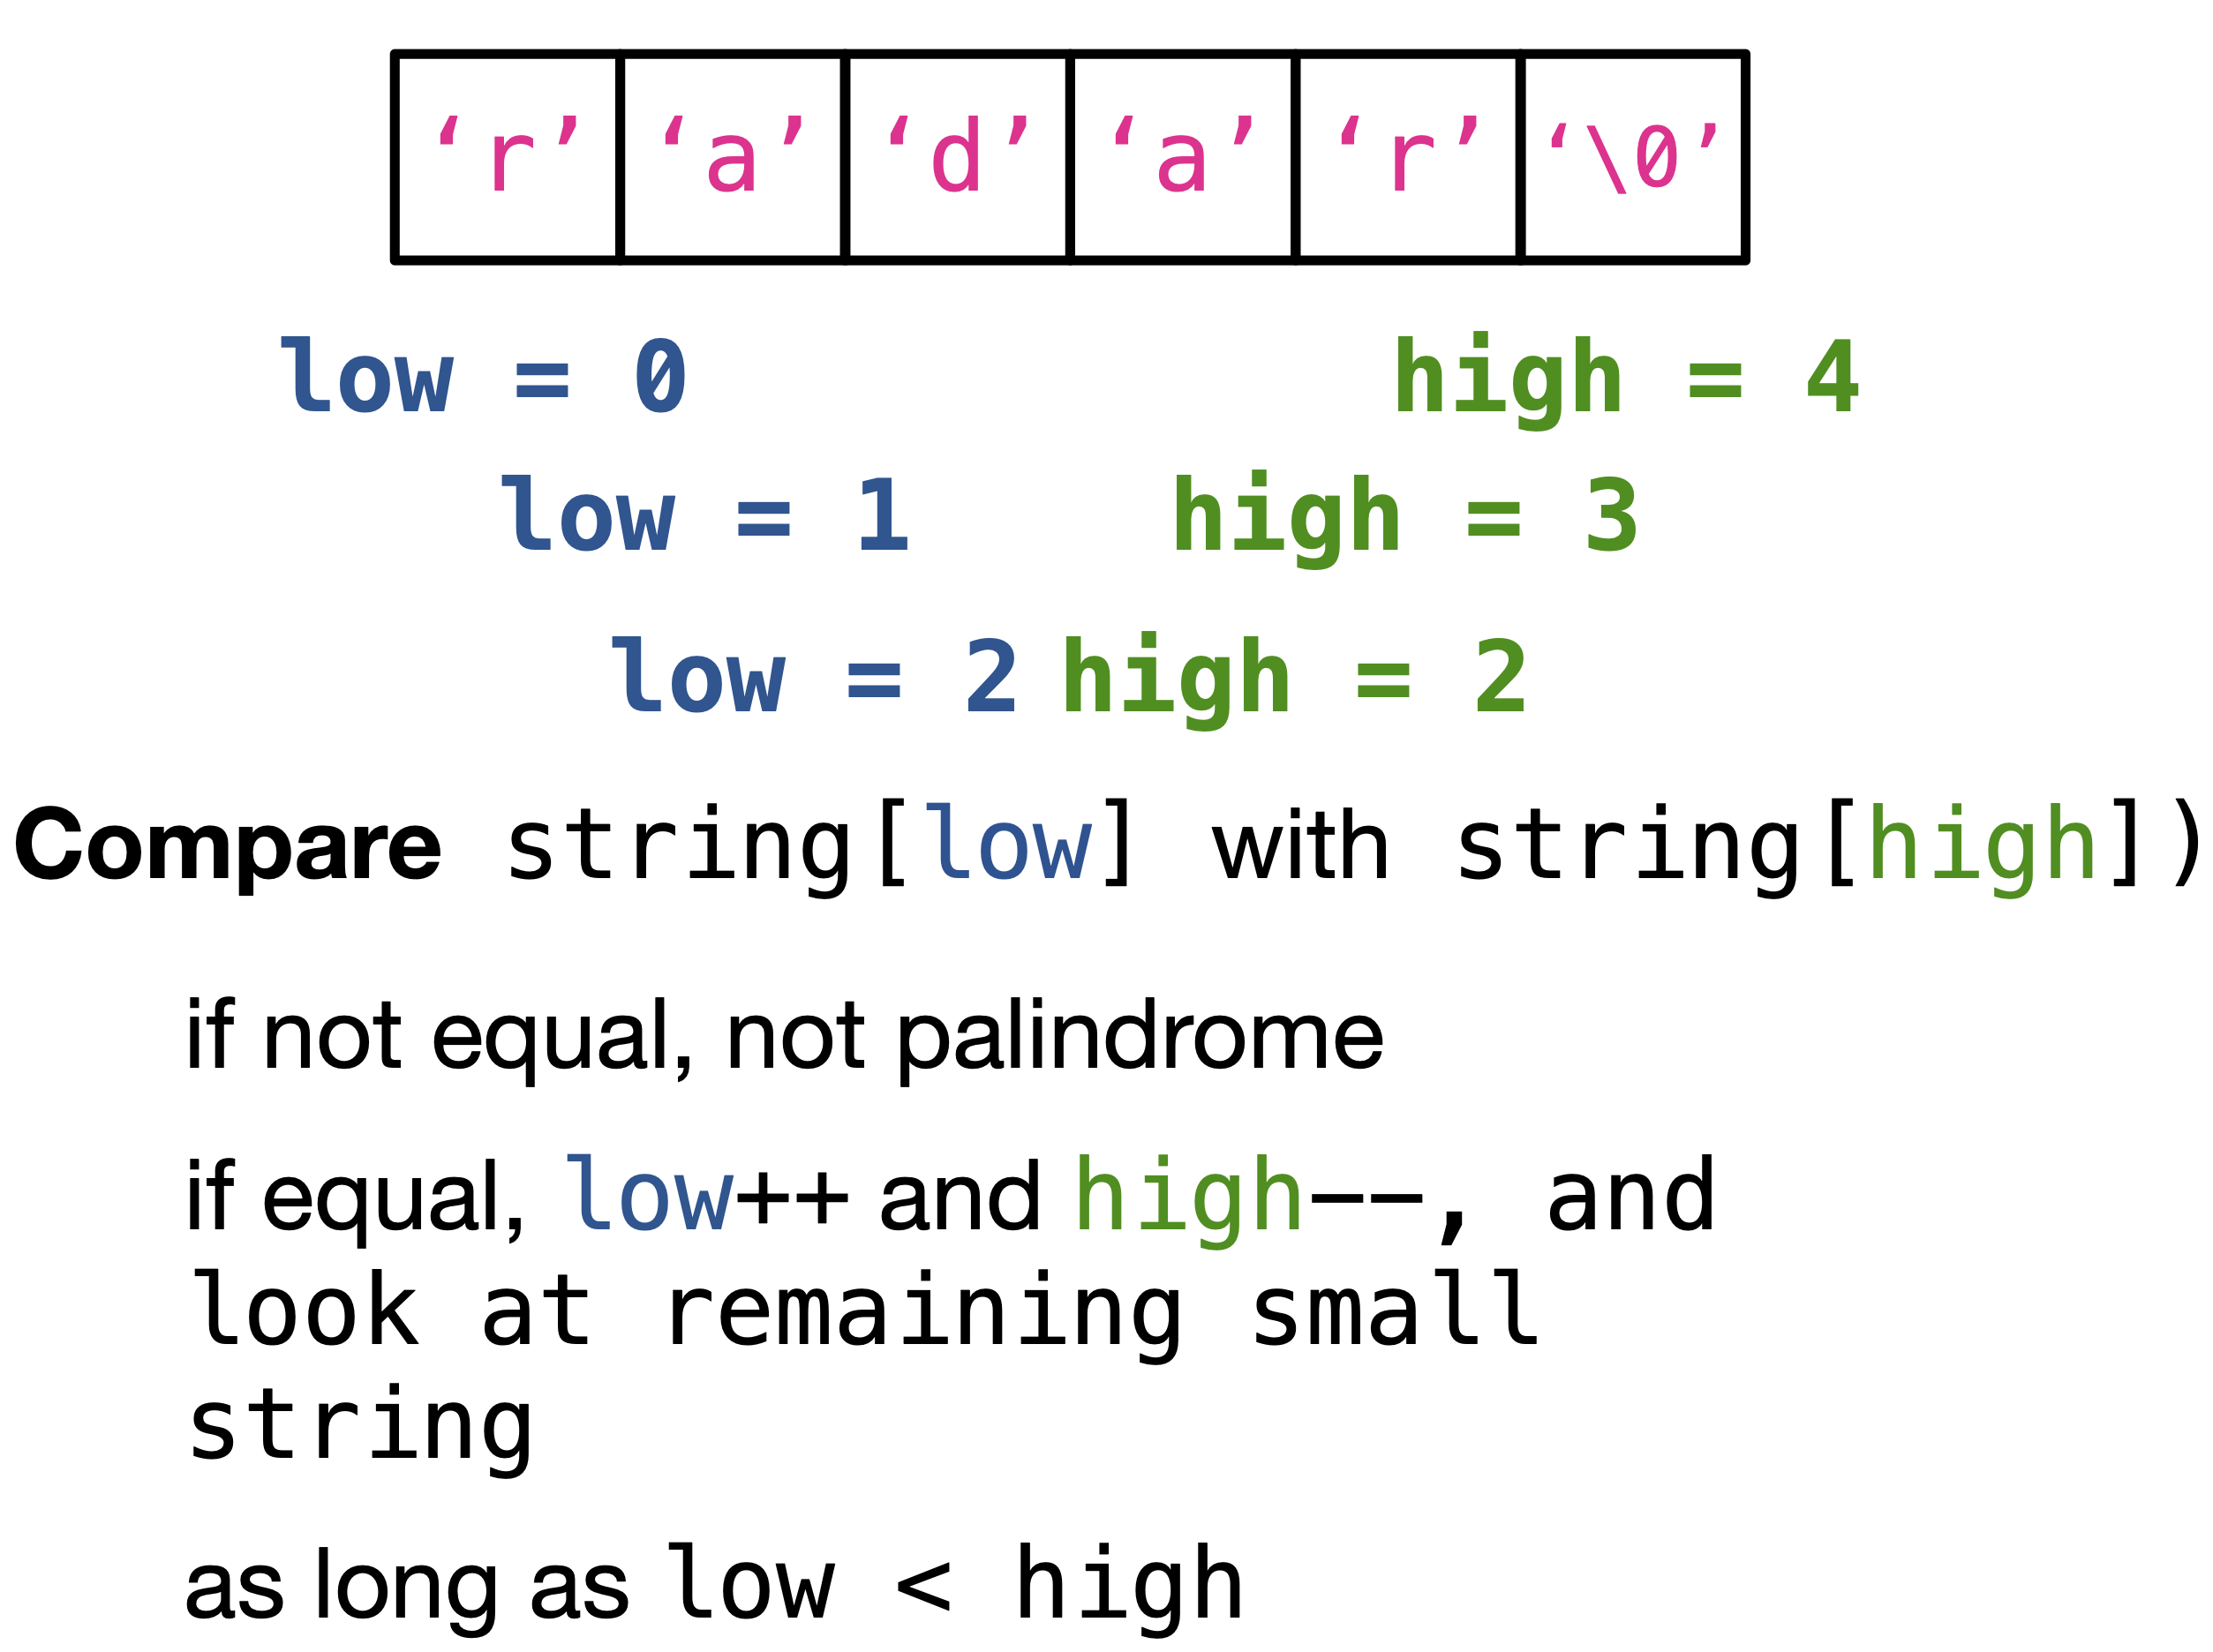 Steps to determine if a string is a palindrome.